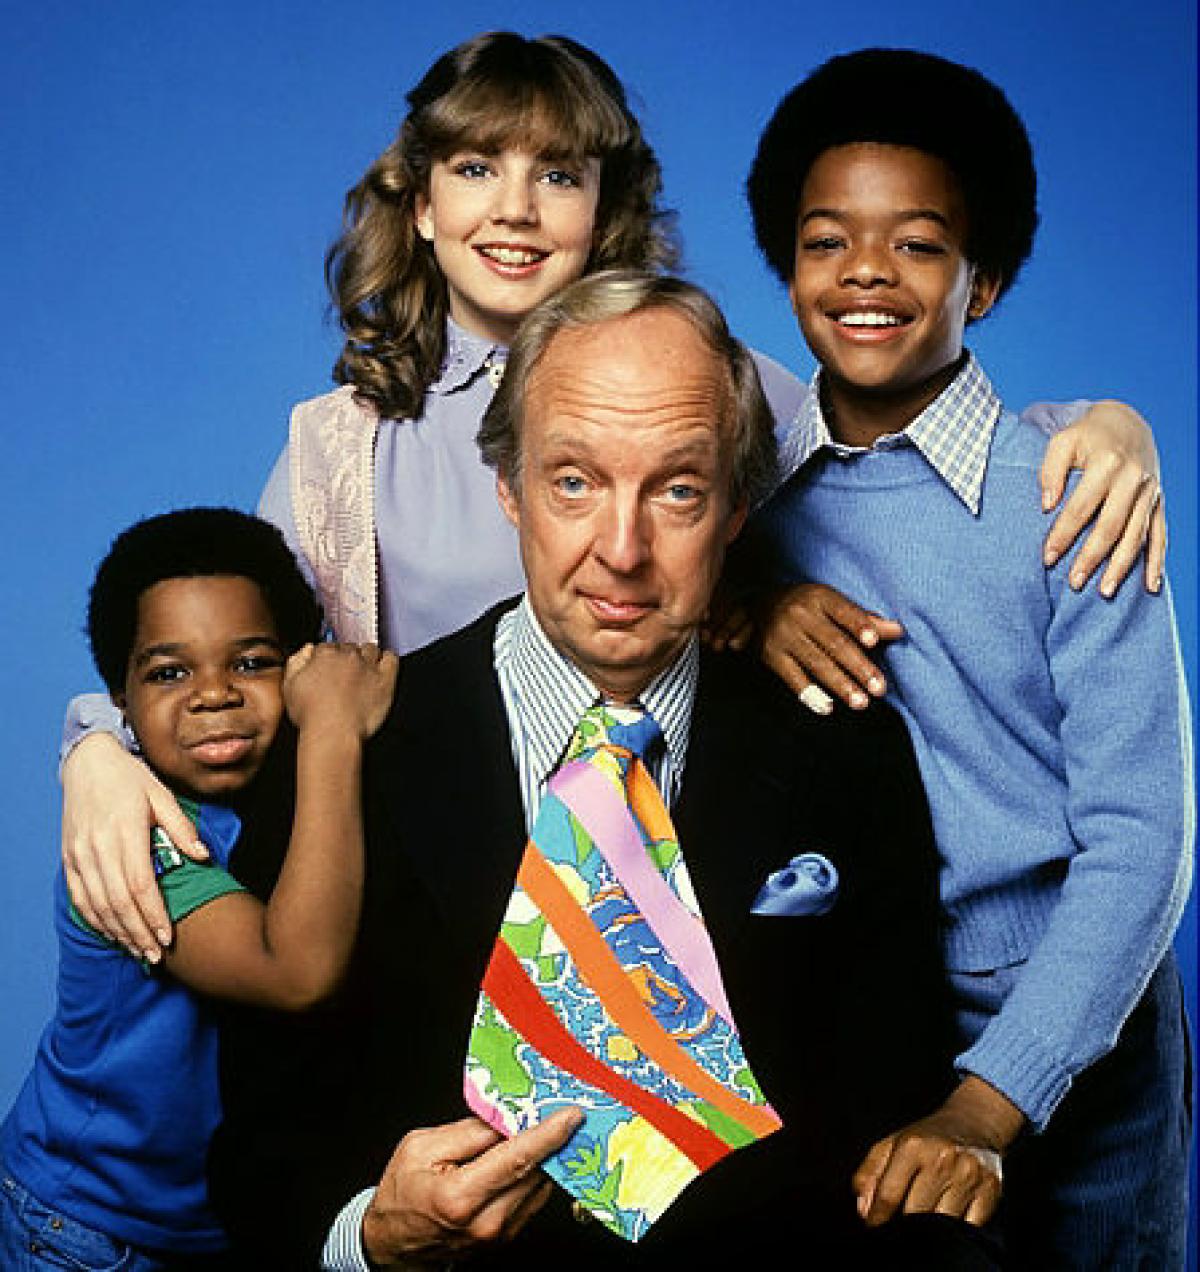 Can You Name These 1970s TV Shows? (Easy Level) Diff'rent Strokes